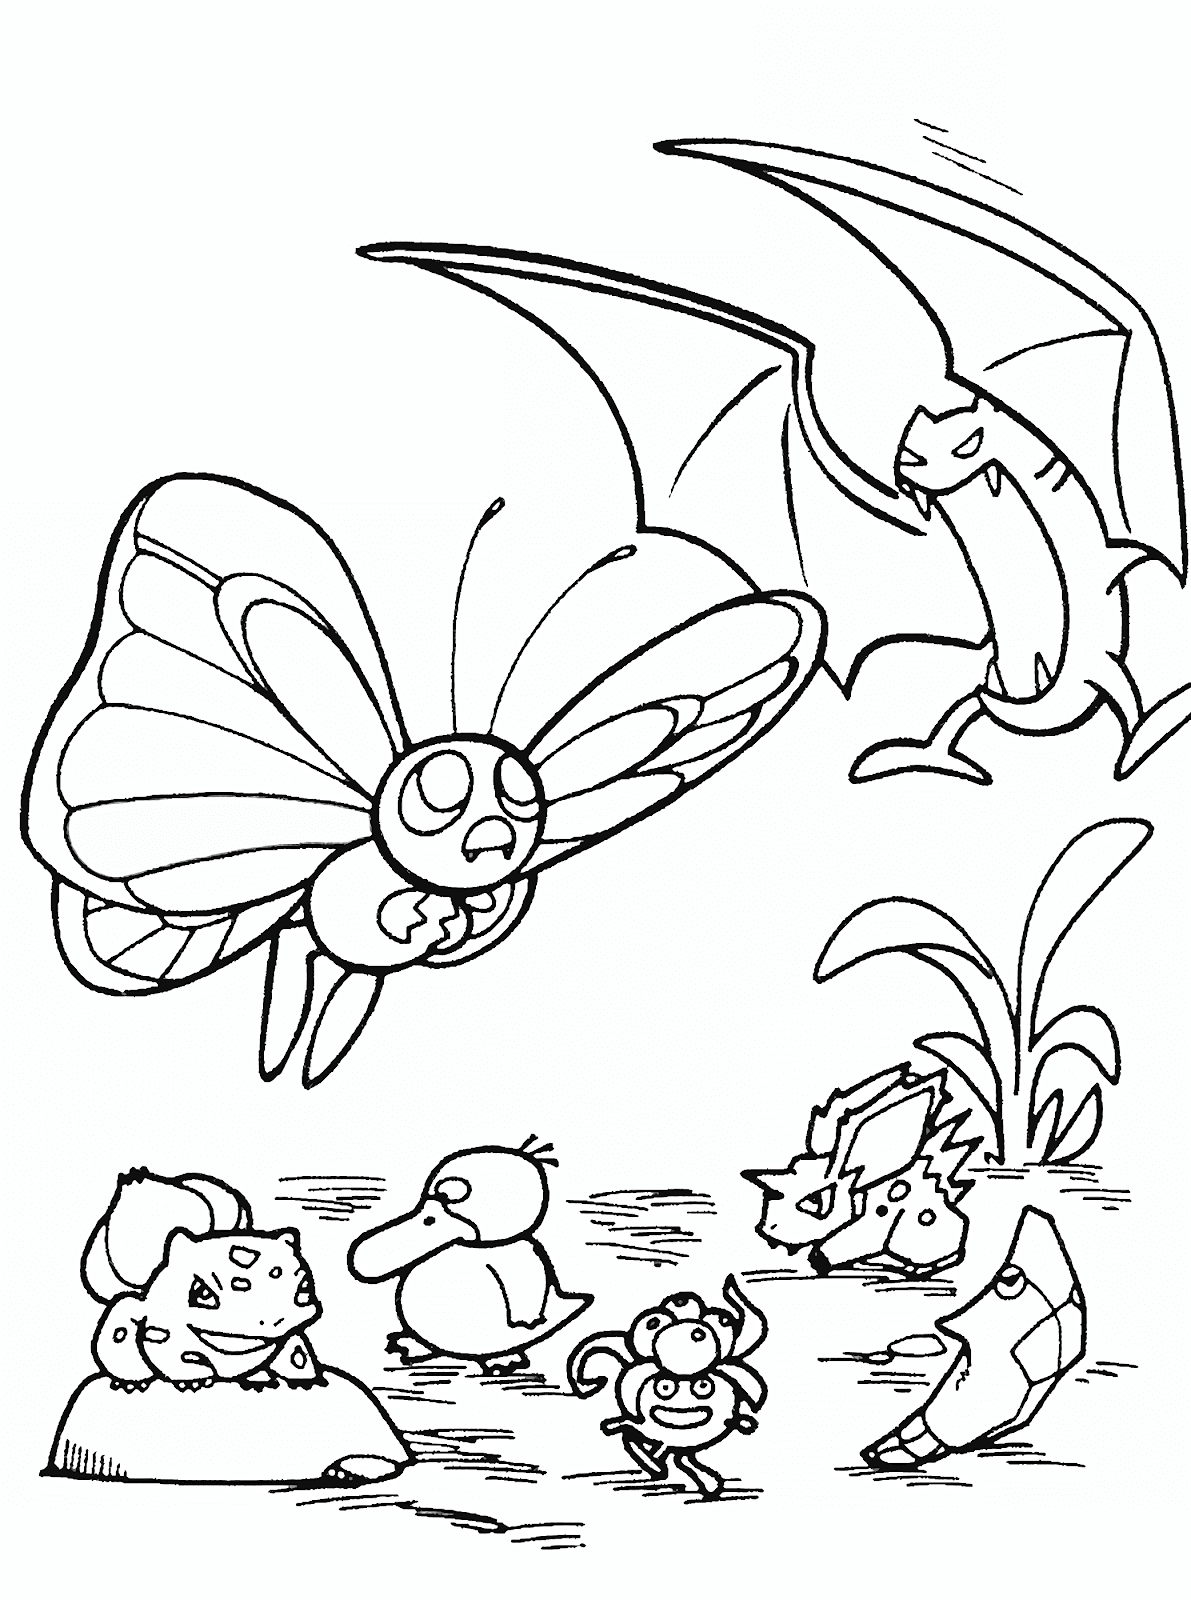 Butterfree Coloring Pages | Pokemon coloring pages, Pokemon coloring, Star coloring  pages